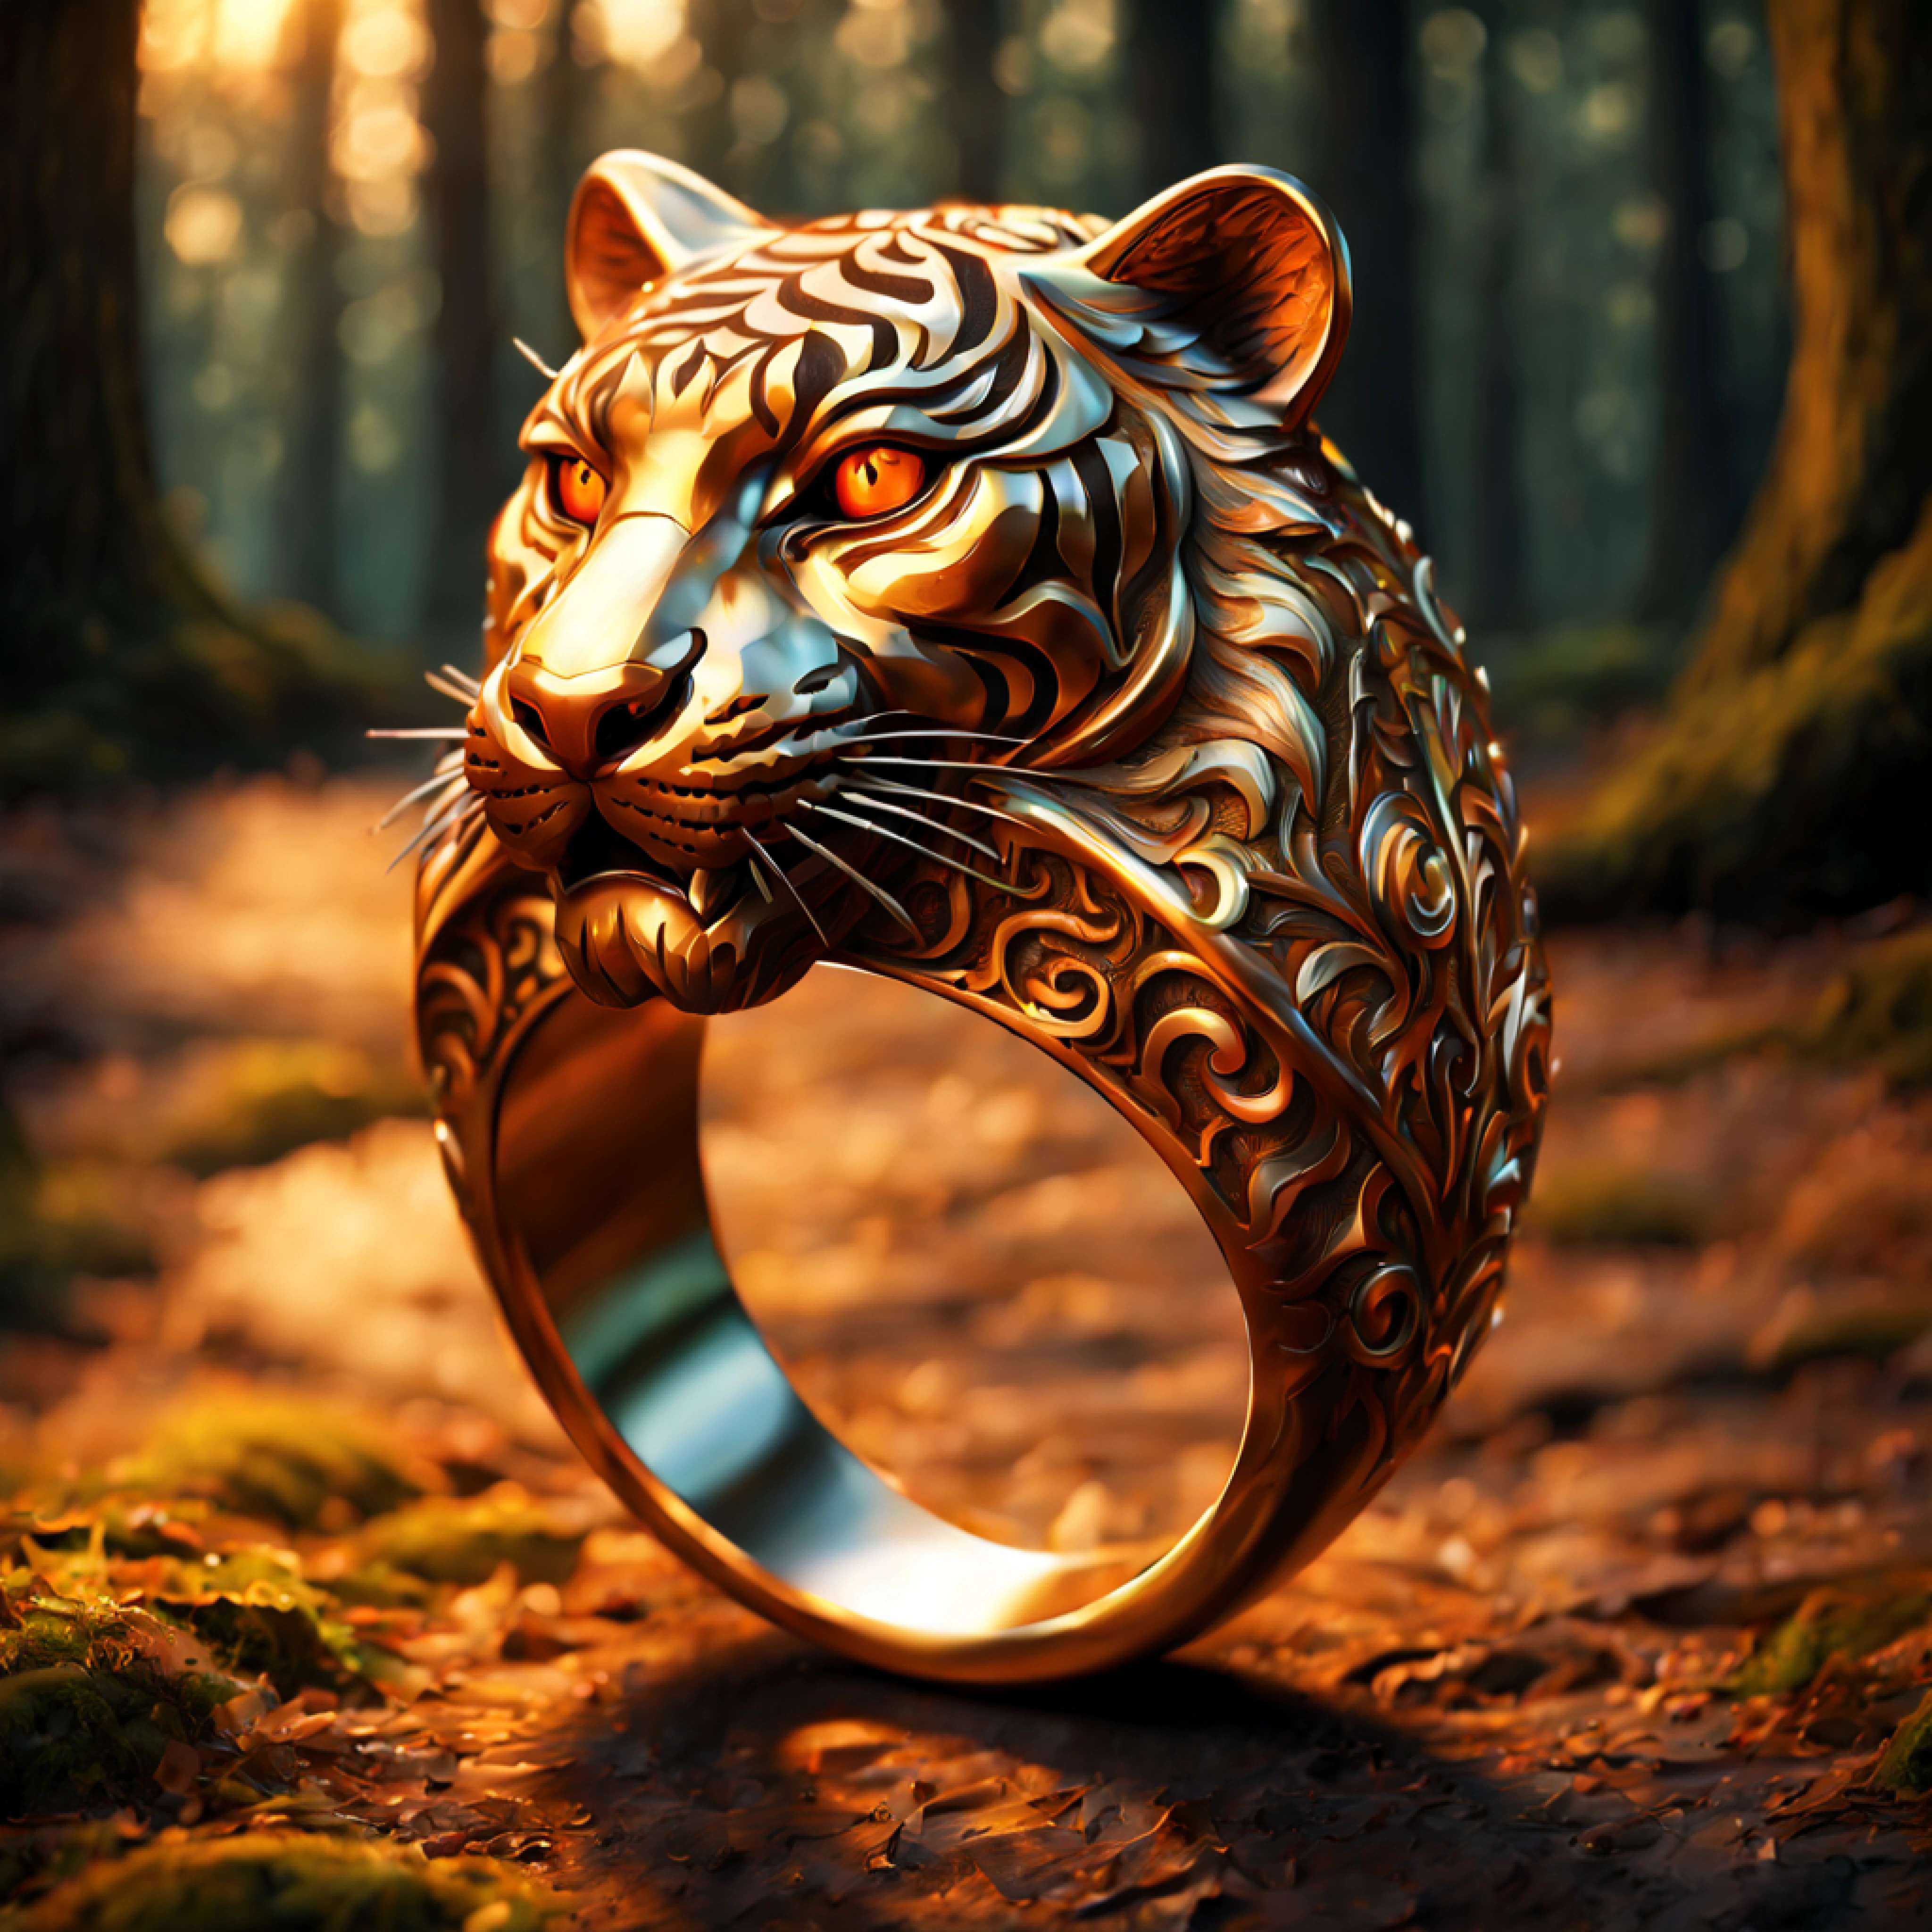 (3D drawing), (majestic ring with intricate tiger engravings on it:1.2), rich ornate patterns, orange (metallic reflection:1.2), (romantic forest background:1.4)